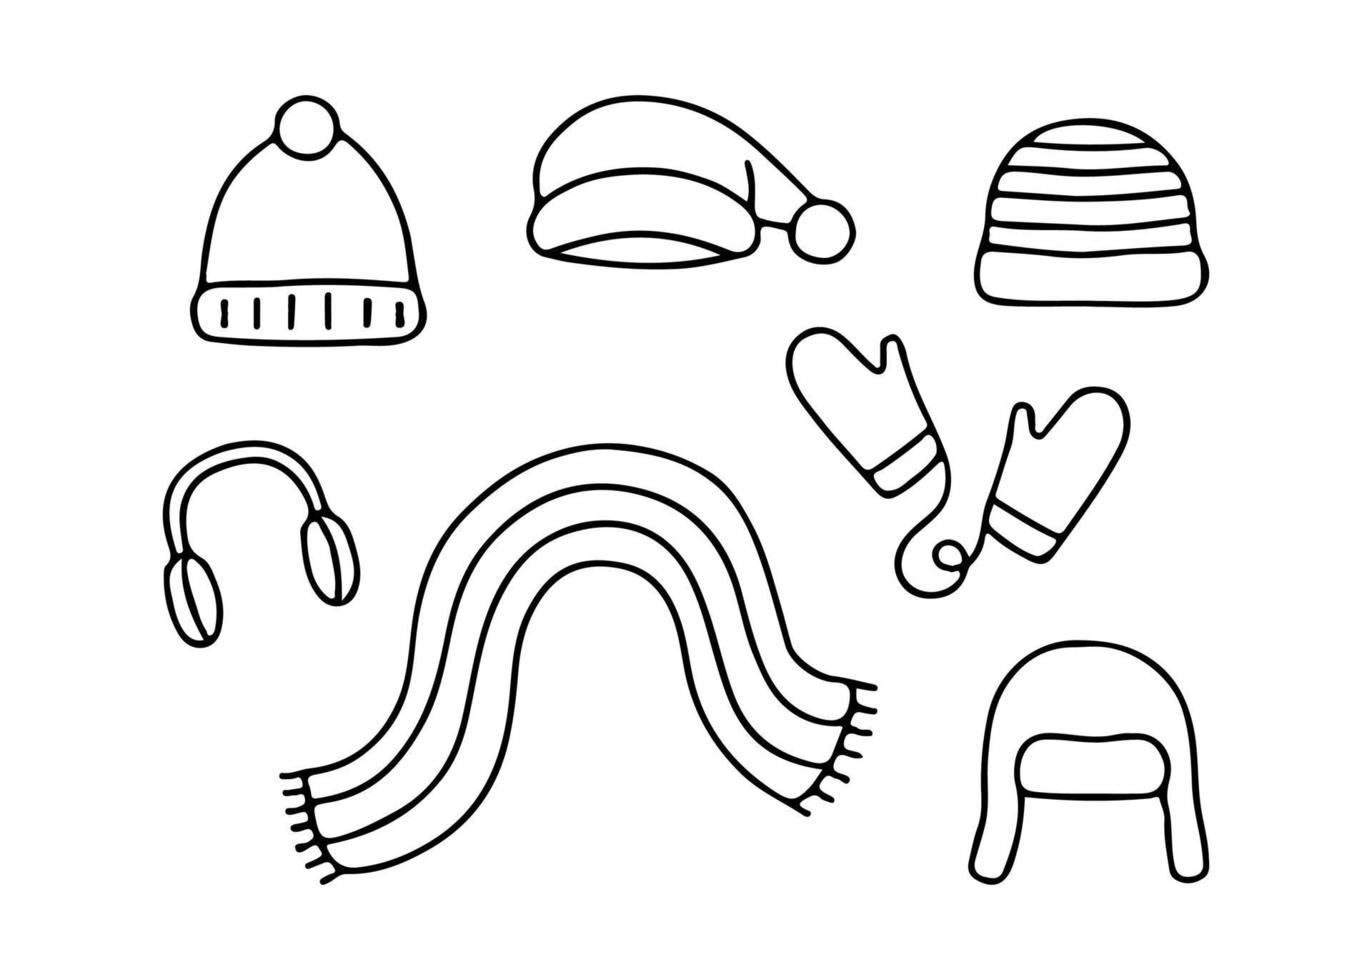 Hat and scarf in cold weather, line doodle sketch set. Hand drawn hats and scarves, Christmas cap, headphones. Headdress clothes for winter. Vector illustration